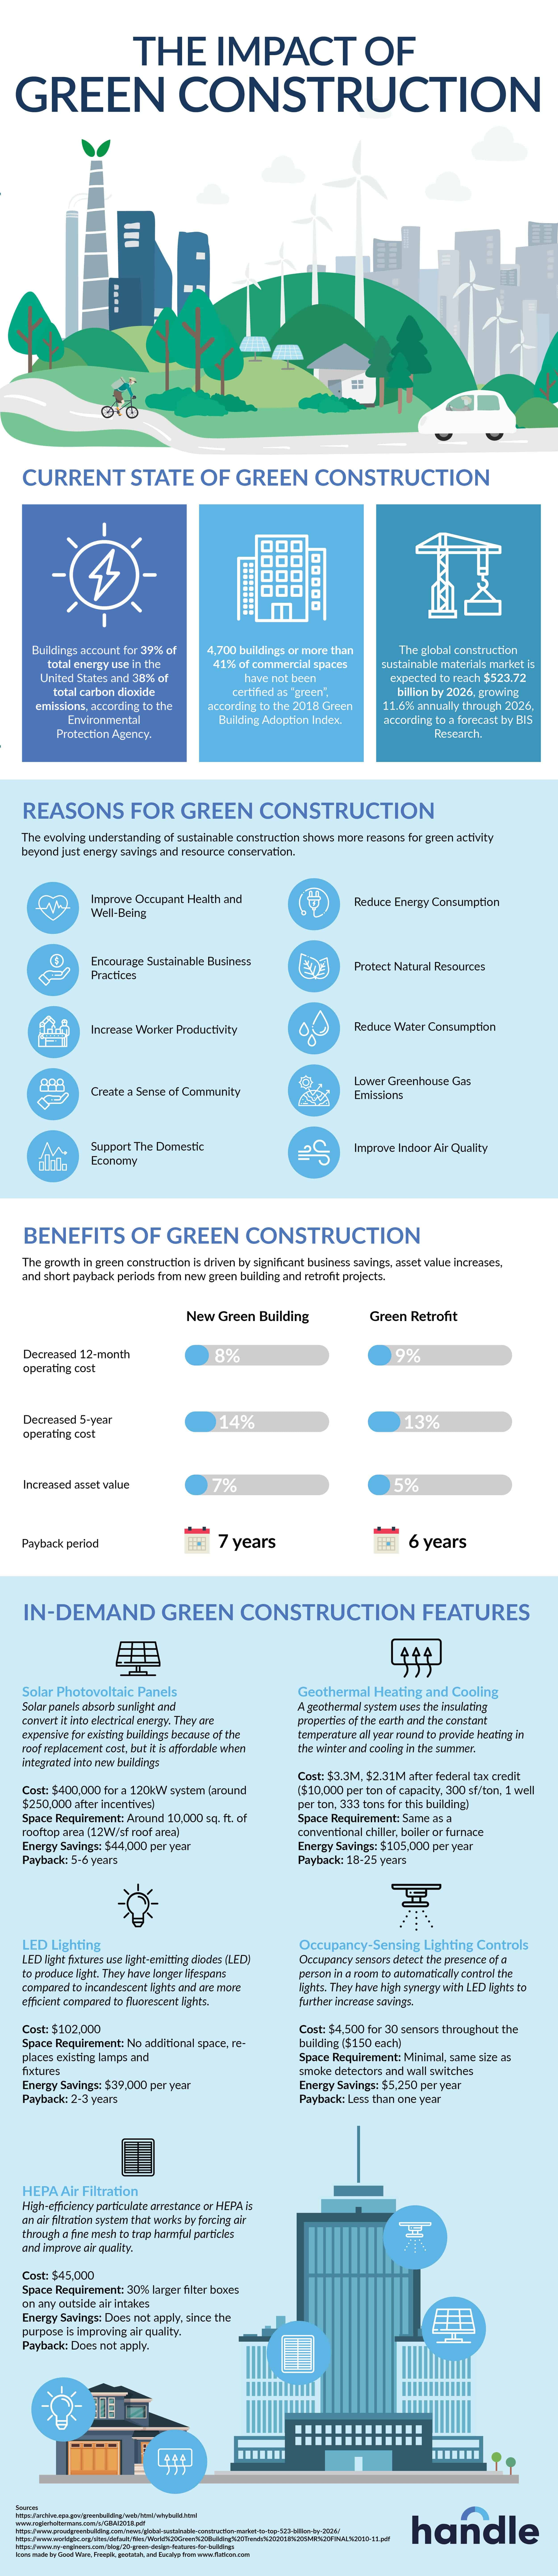 The Impact of Green Construction